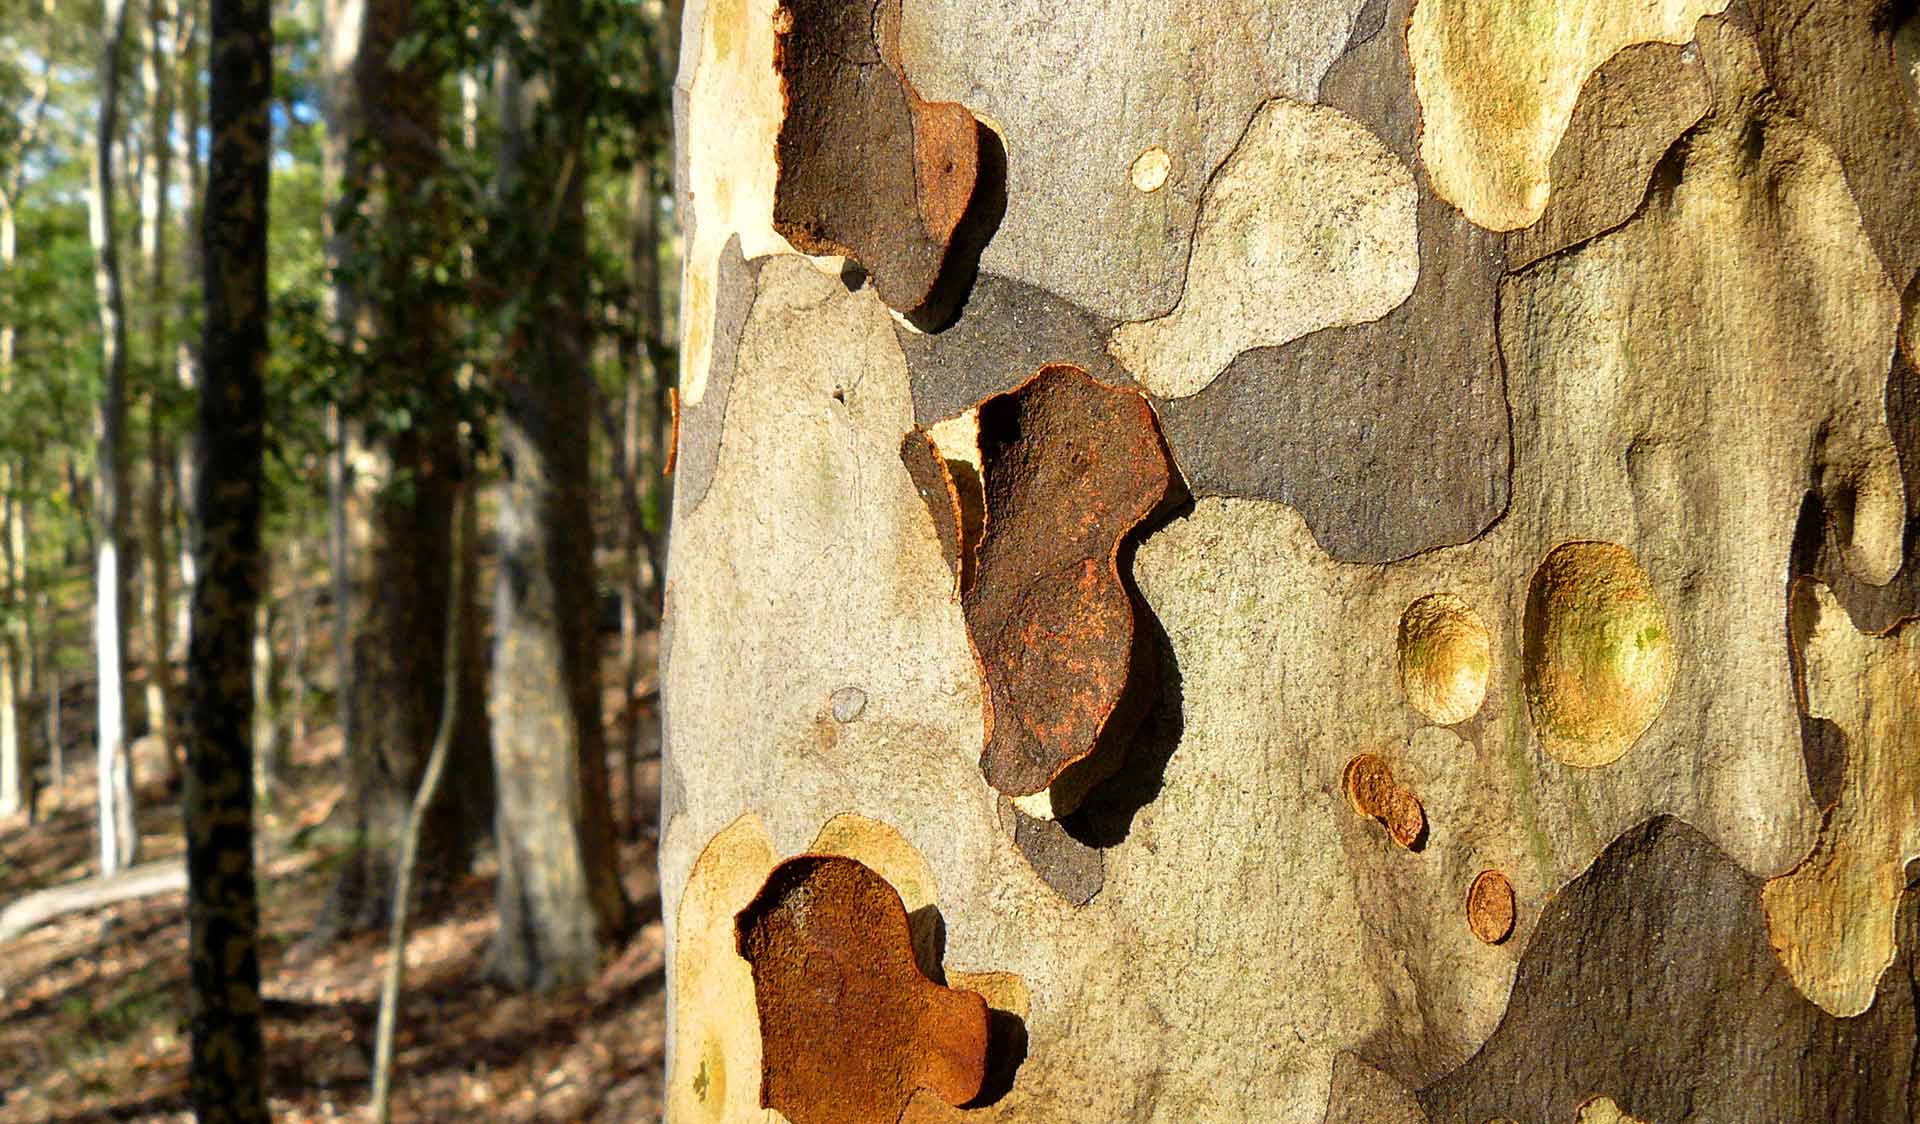 Spotted gum